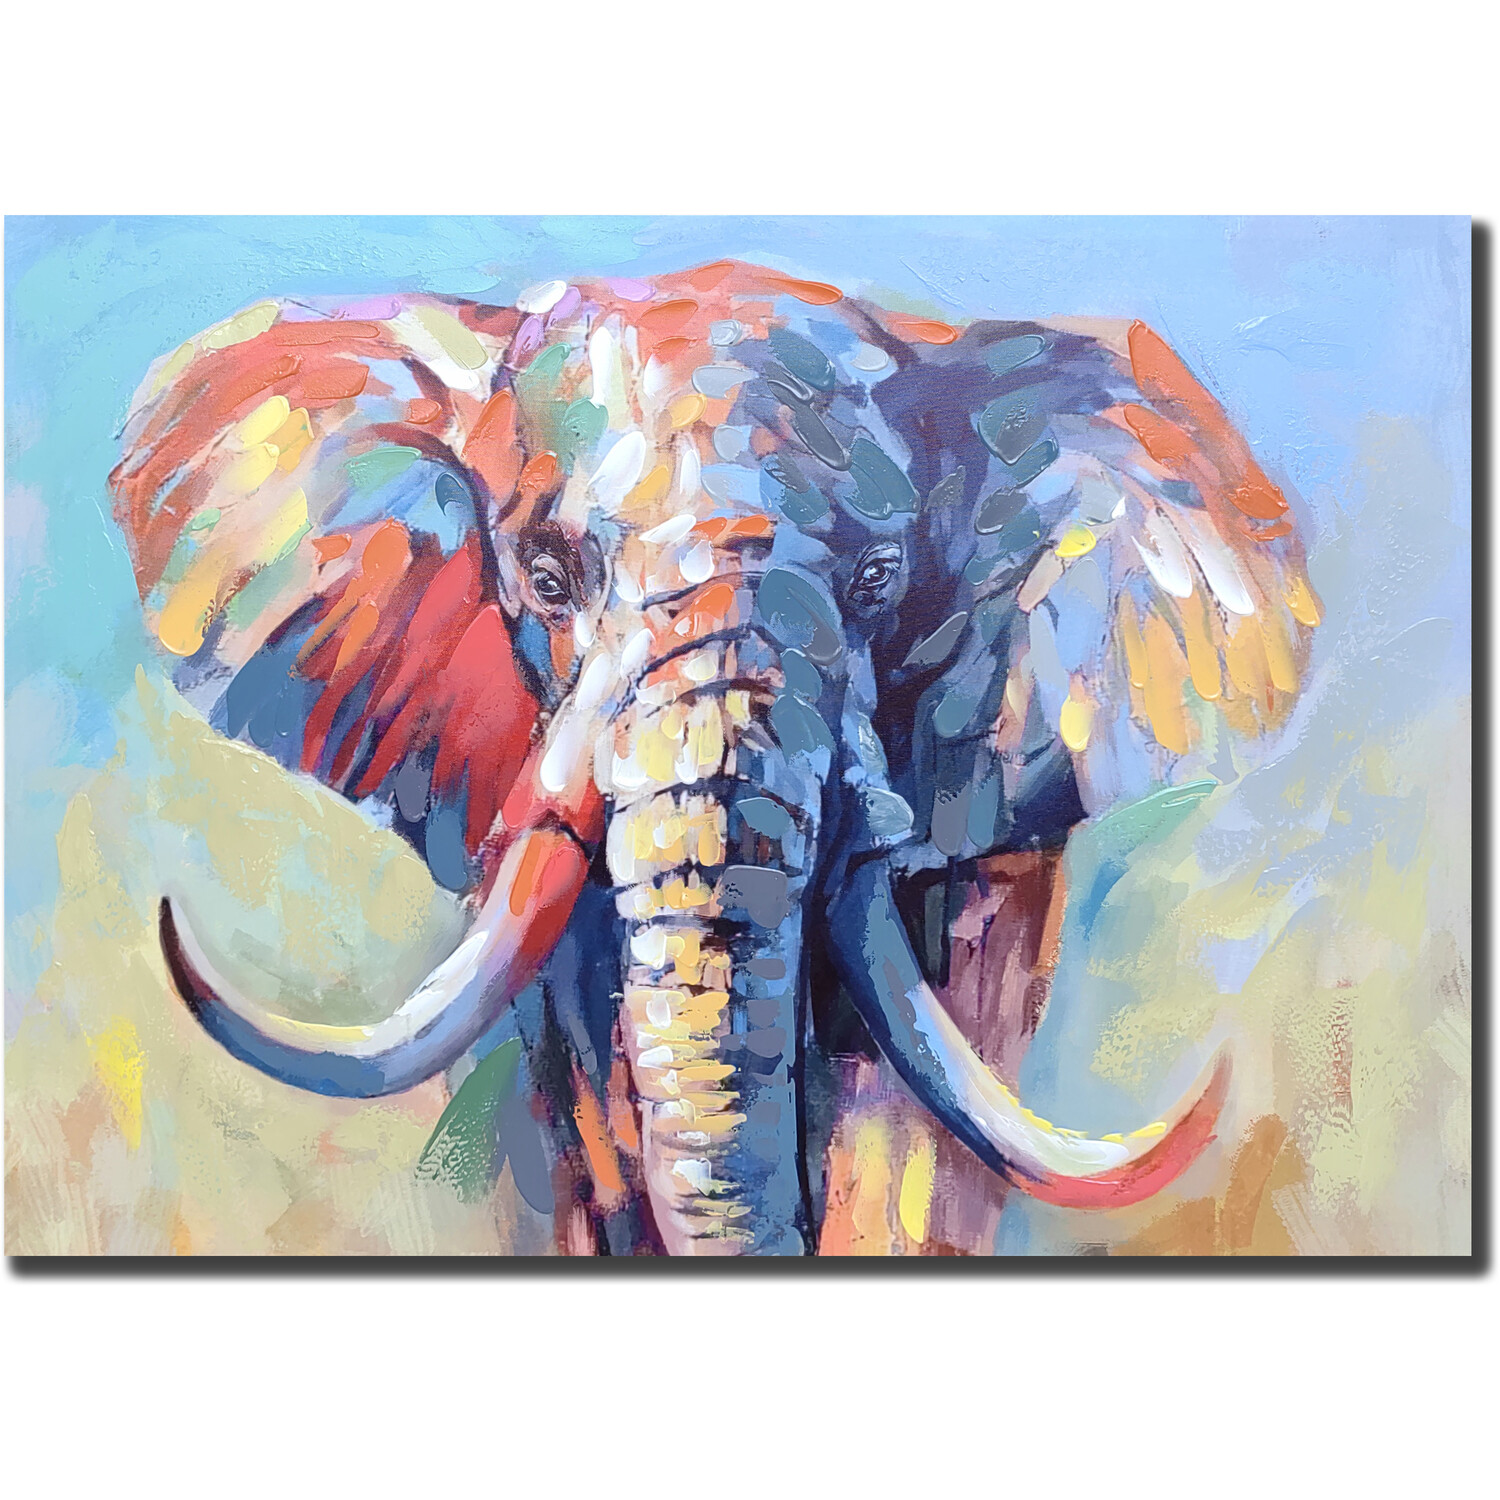 Bright Hand Painted Elephant Canvas 70 x 100cm Image